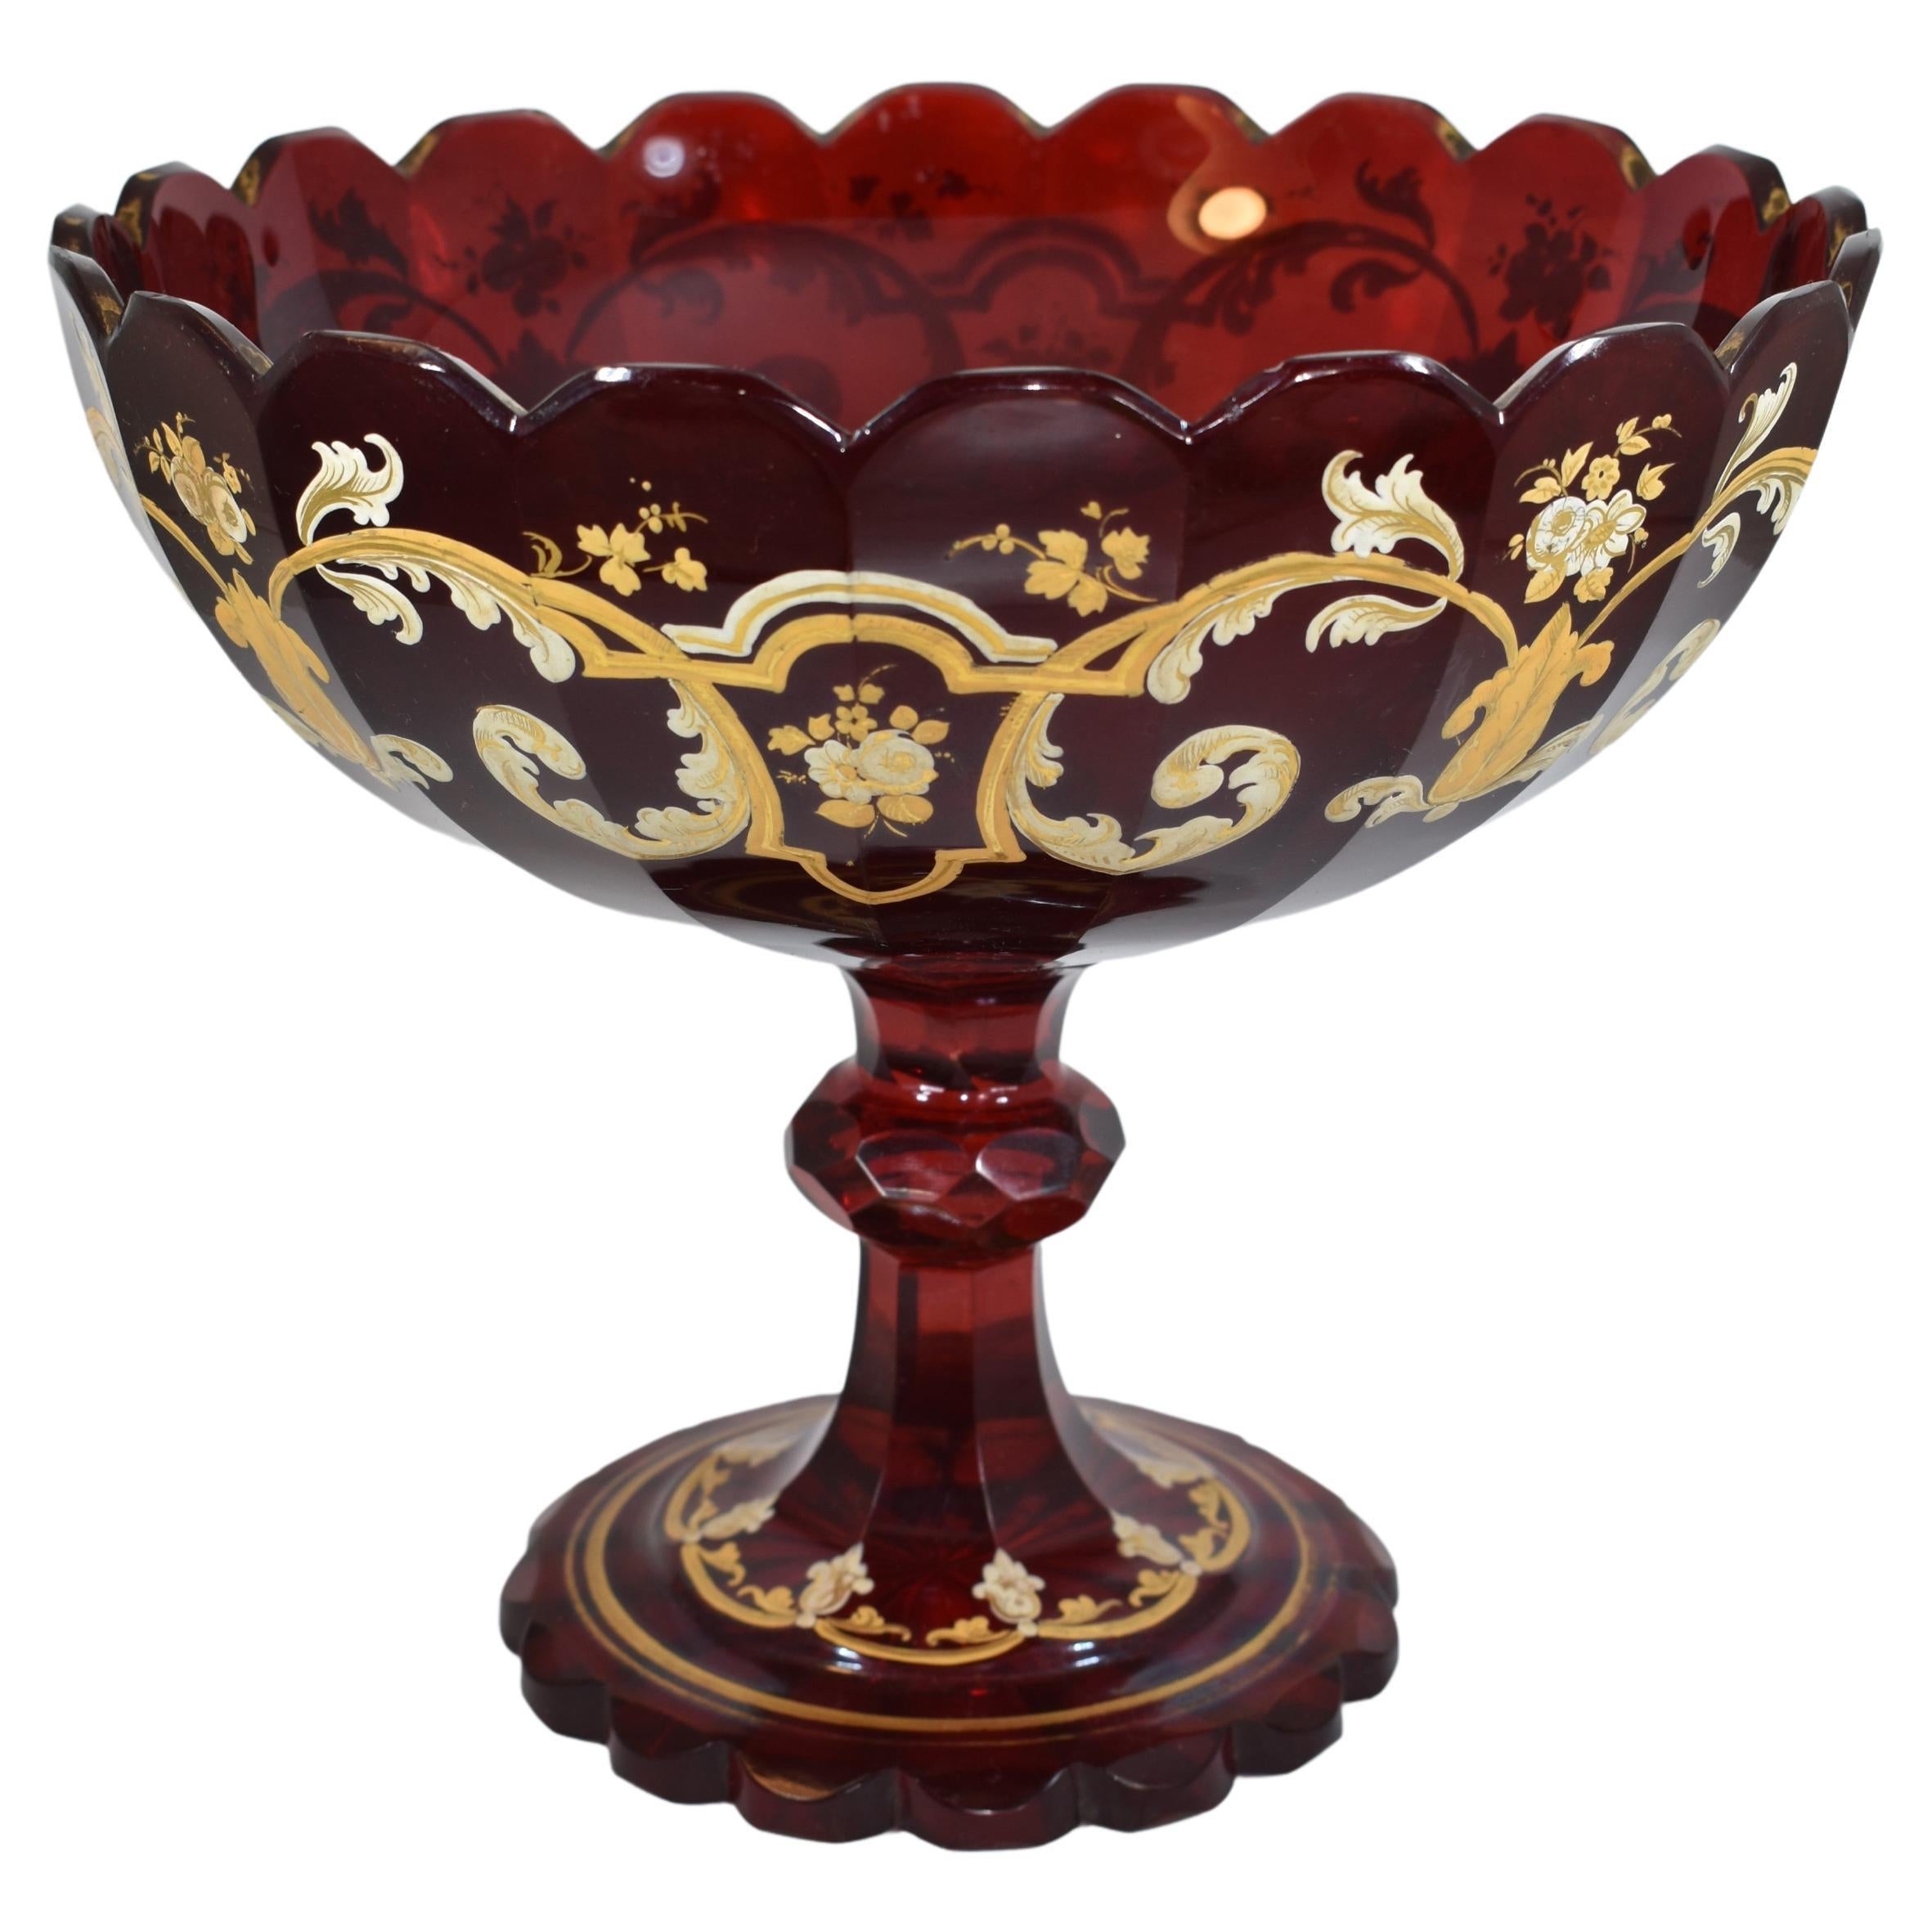 Large Antique Bohemian Ruby Red Enameled Glass Tazza Bowl, 19th Century In Good Condition For Sale In Rostock, MV